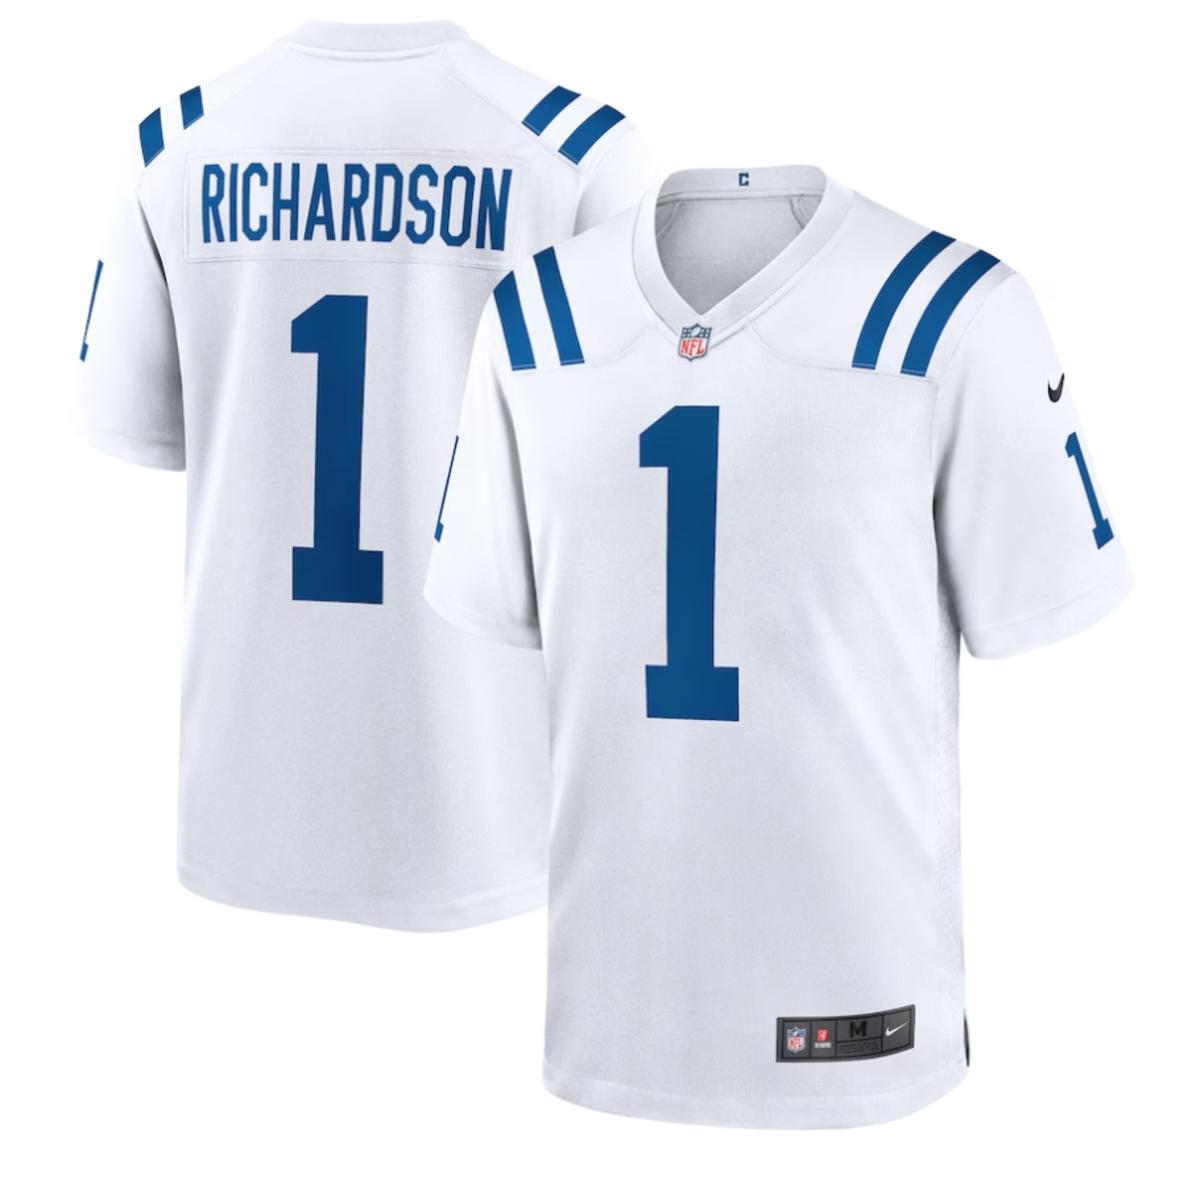 Indianapolis Colts player jersey discount